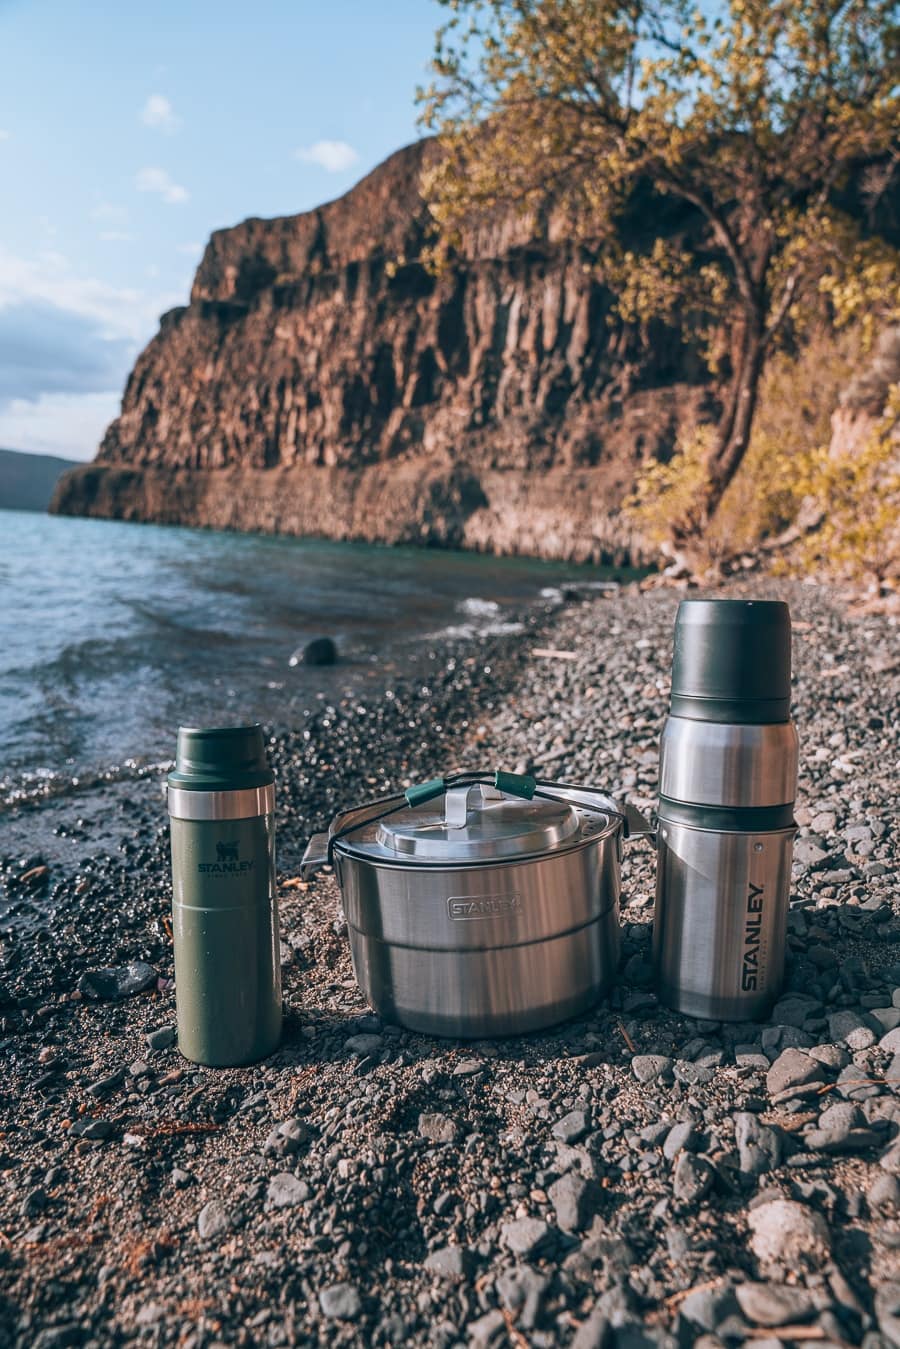 Camp Cooking Gear Guide - Build the Ultimate Camp Kitchen